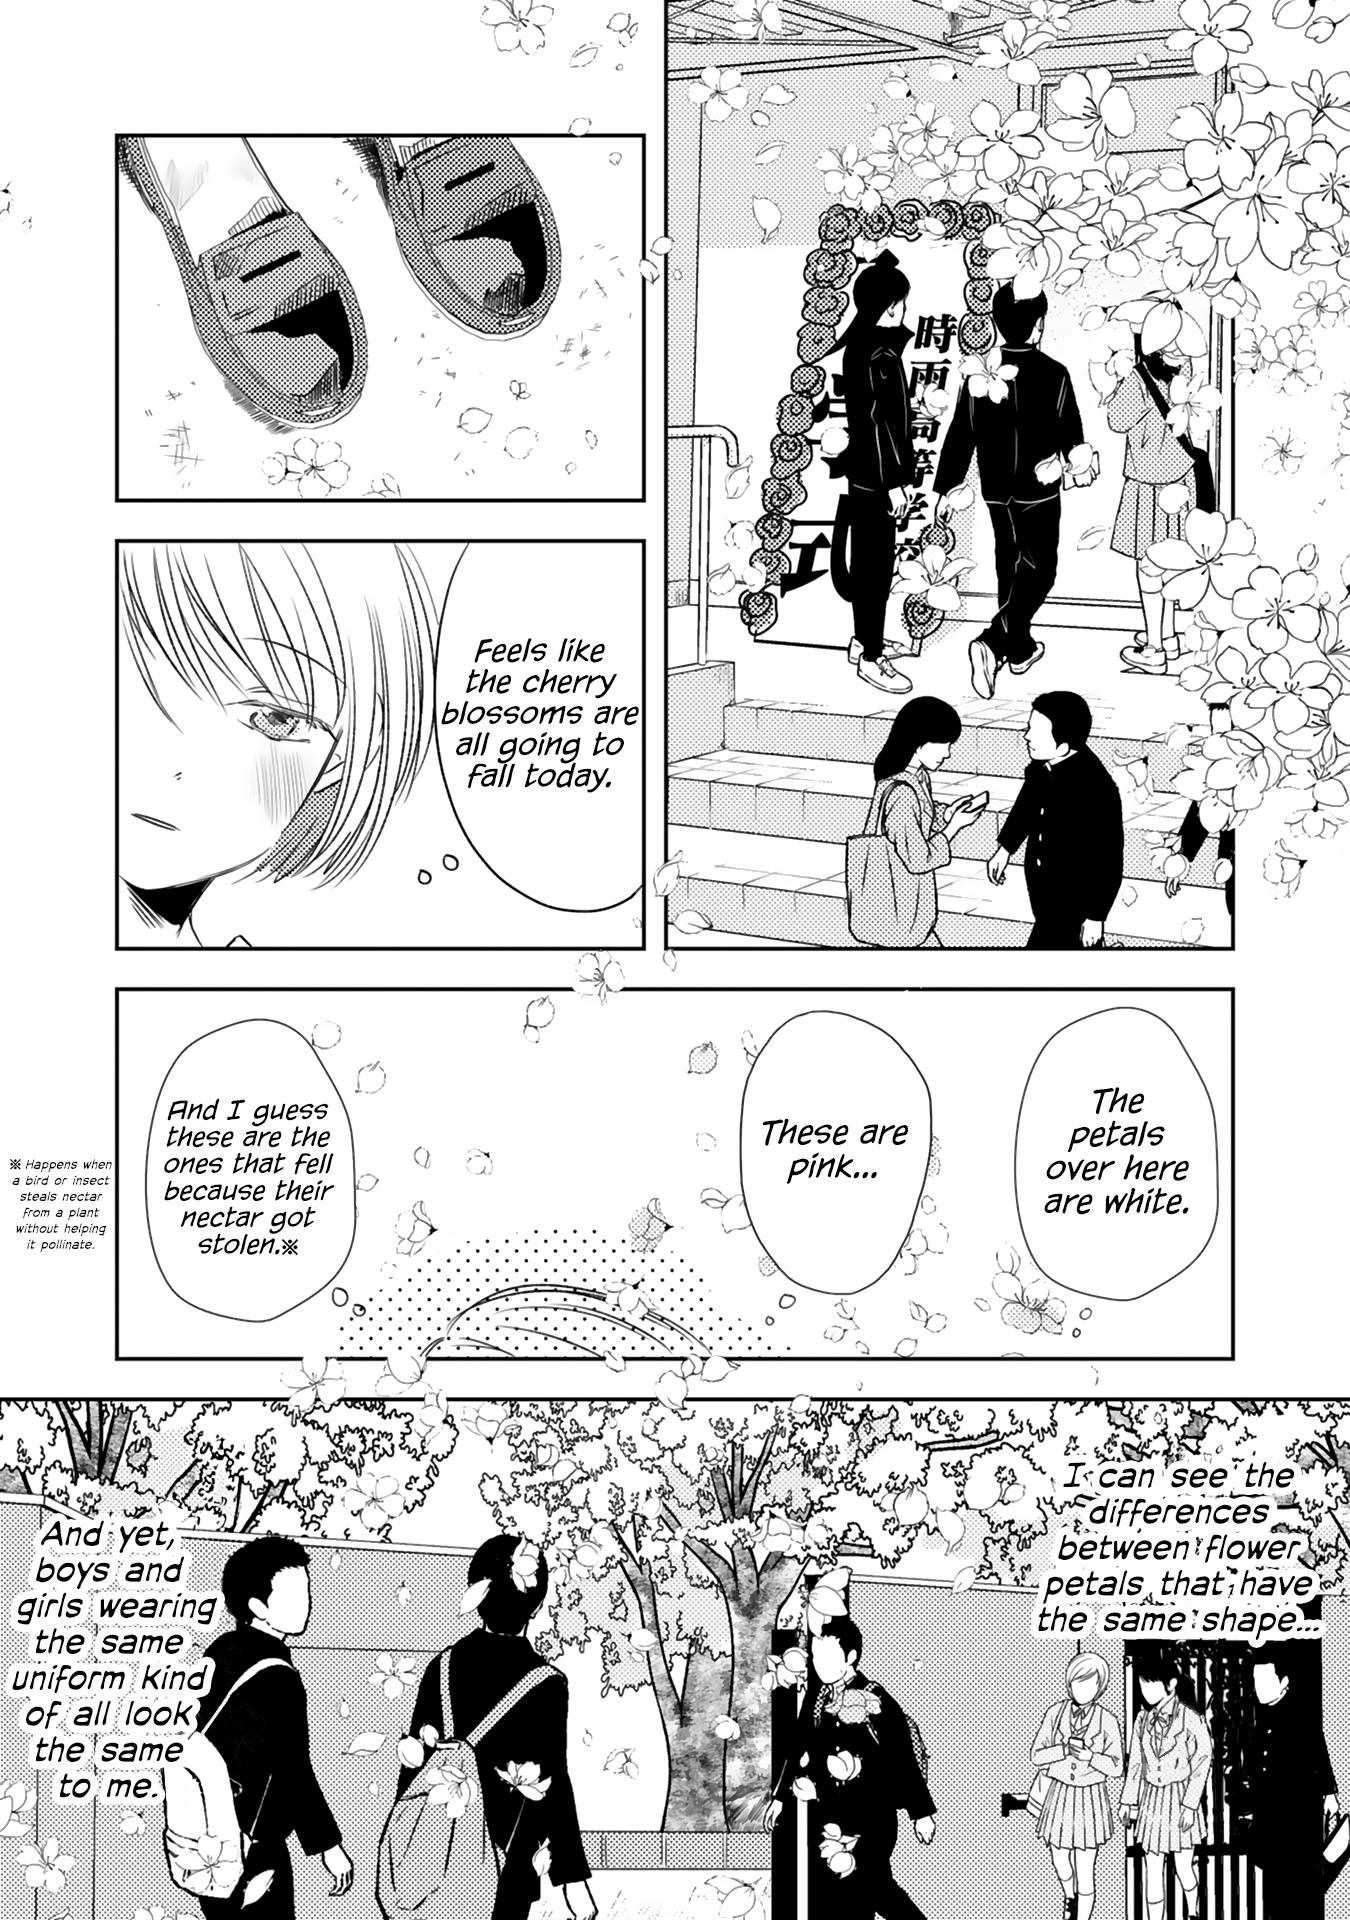 Futsuu No Koitte Nani? Vol.1 Chapter 2: My First Love Was Love At First Sight - Picture 2